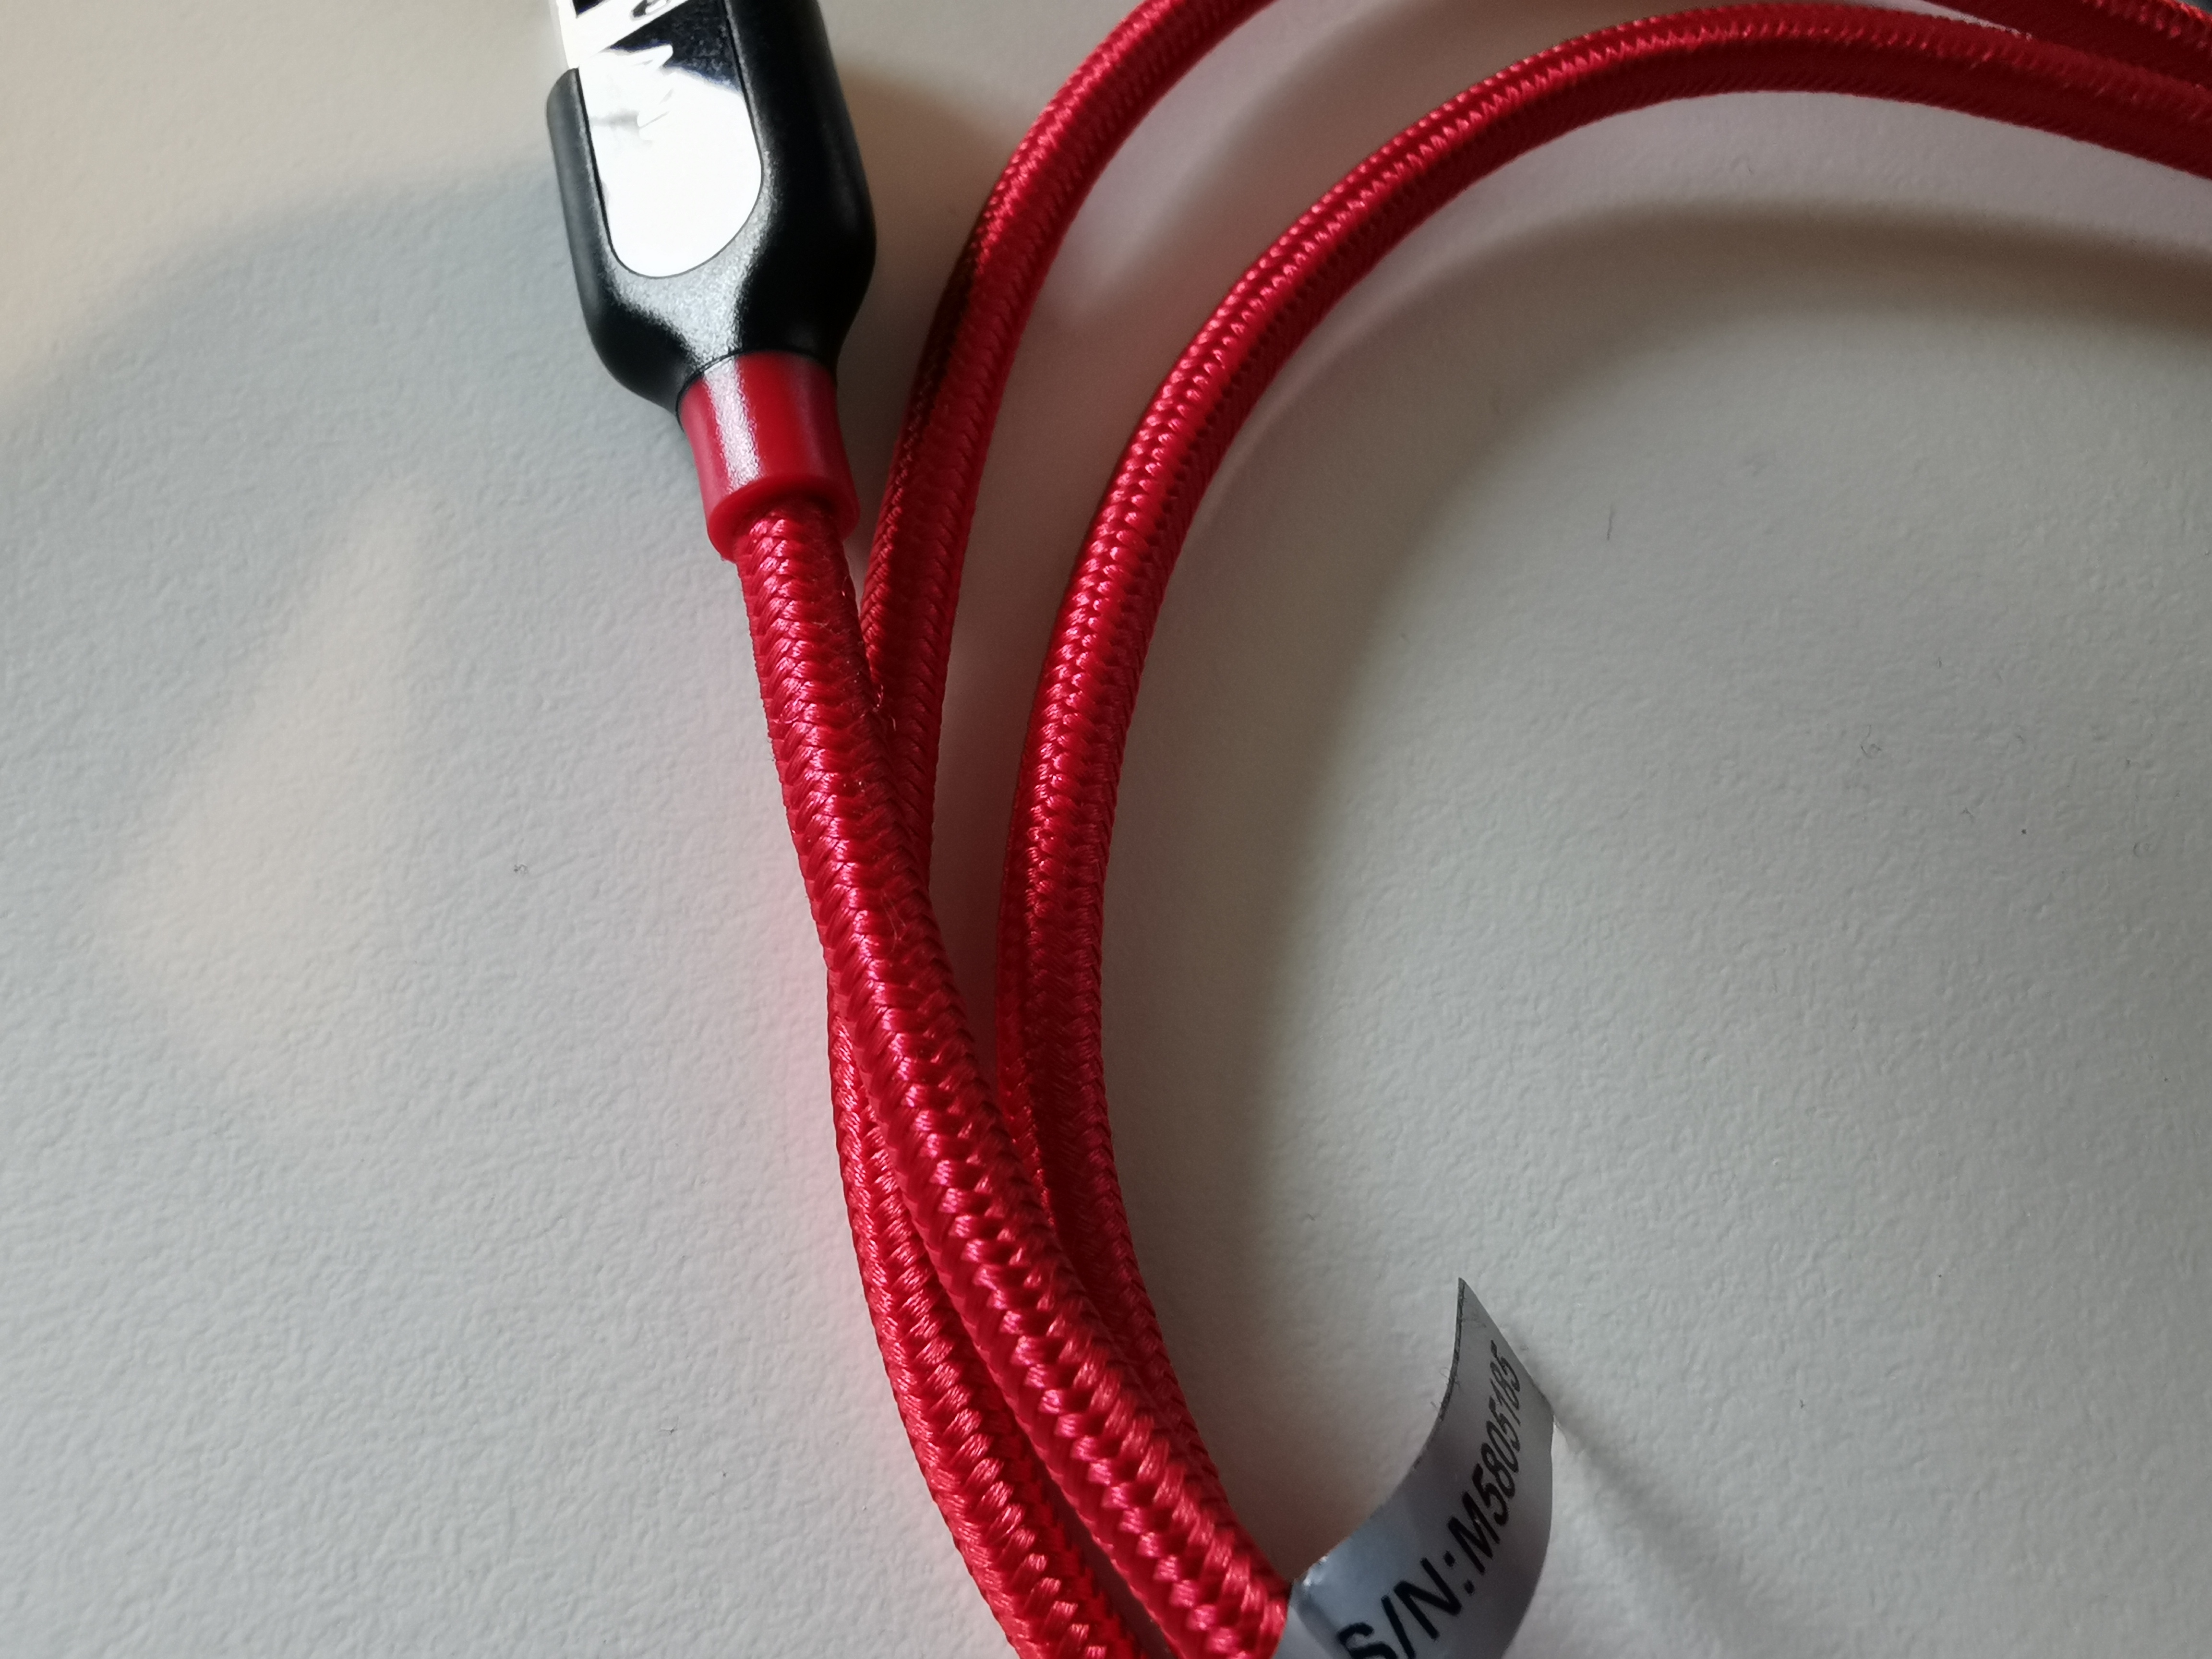 USB Cable with specular color 